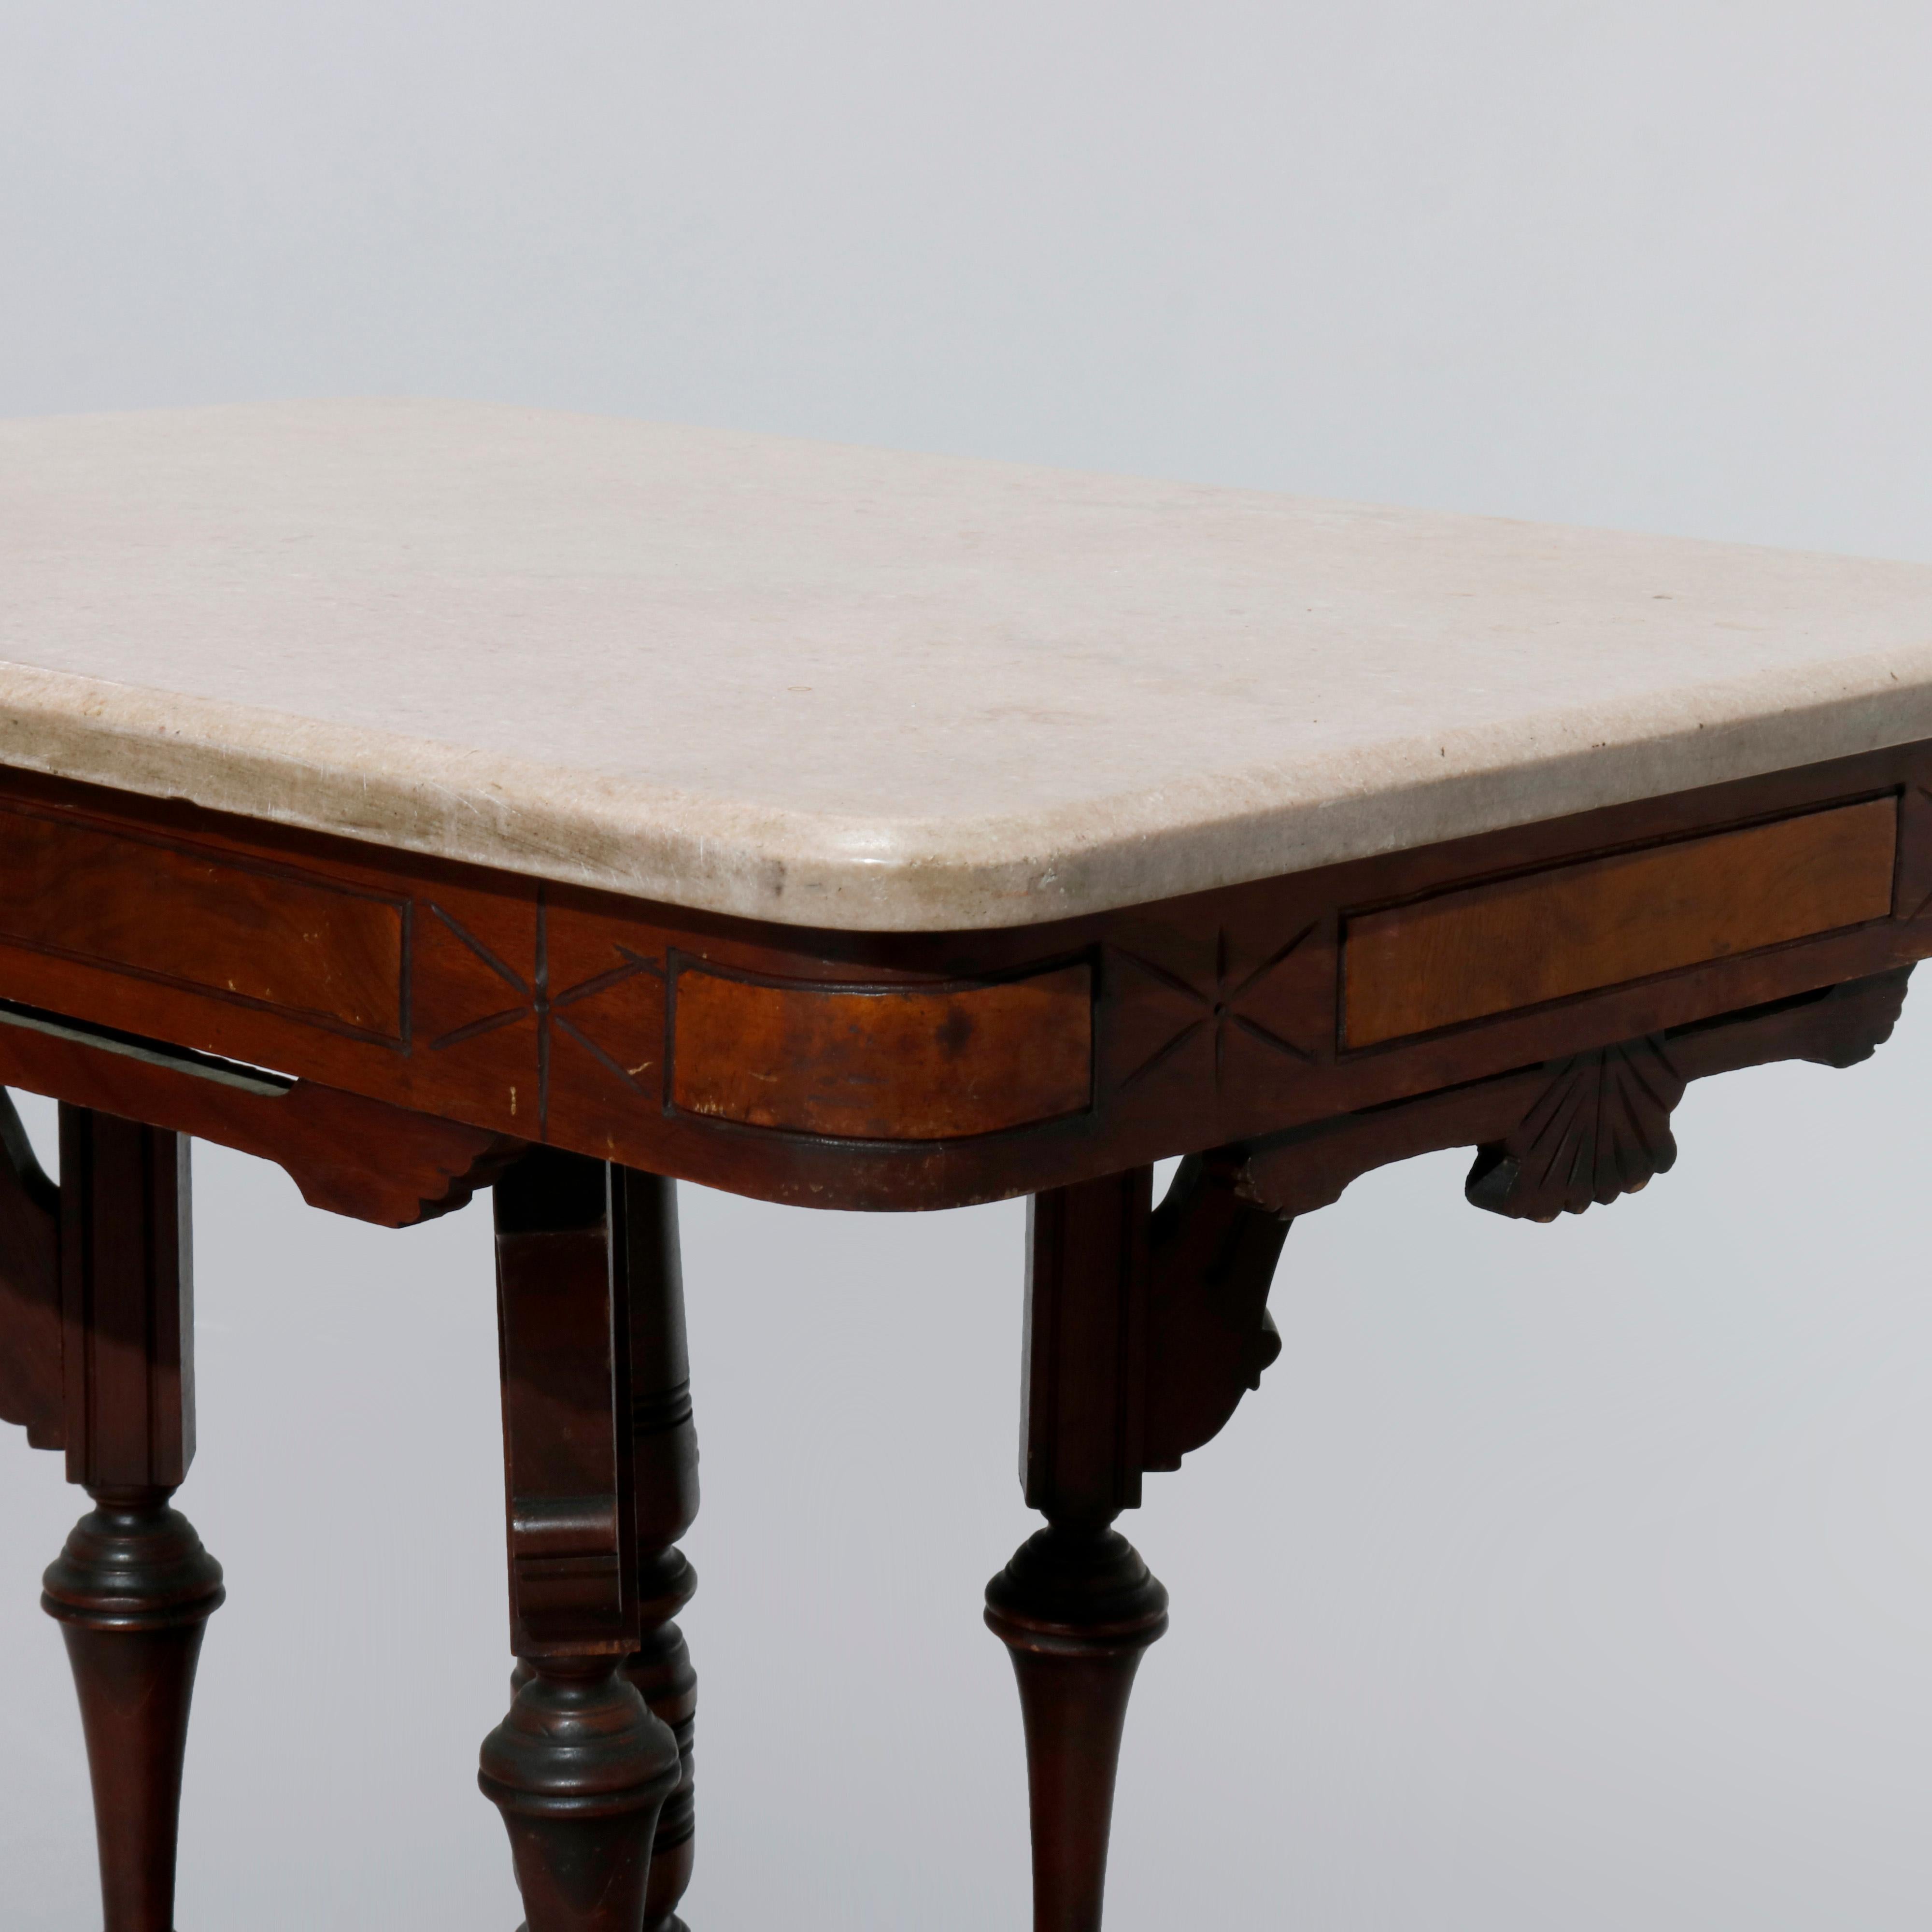 An antique Eastlake parlor table offers marble top over carved walnut base having burl insets, turned supports and pierced foliate corbels, c1890

Measures: 29